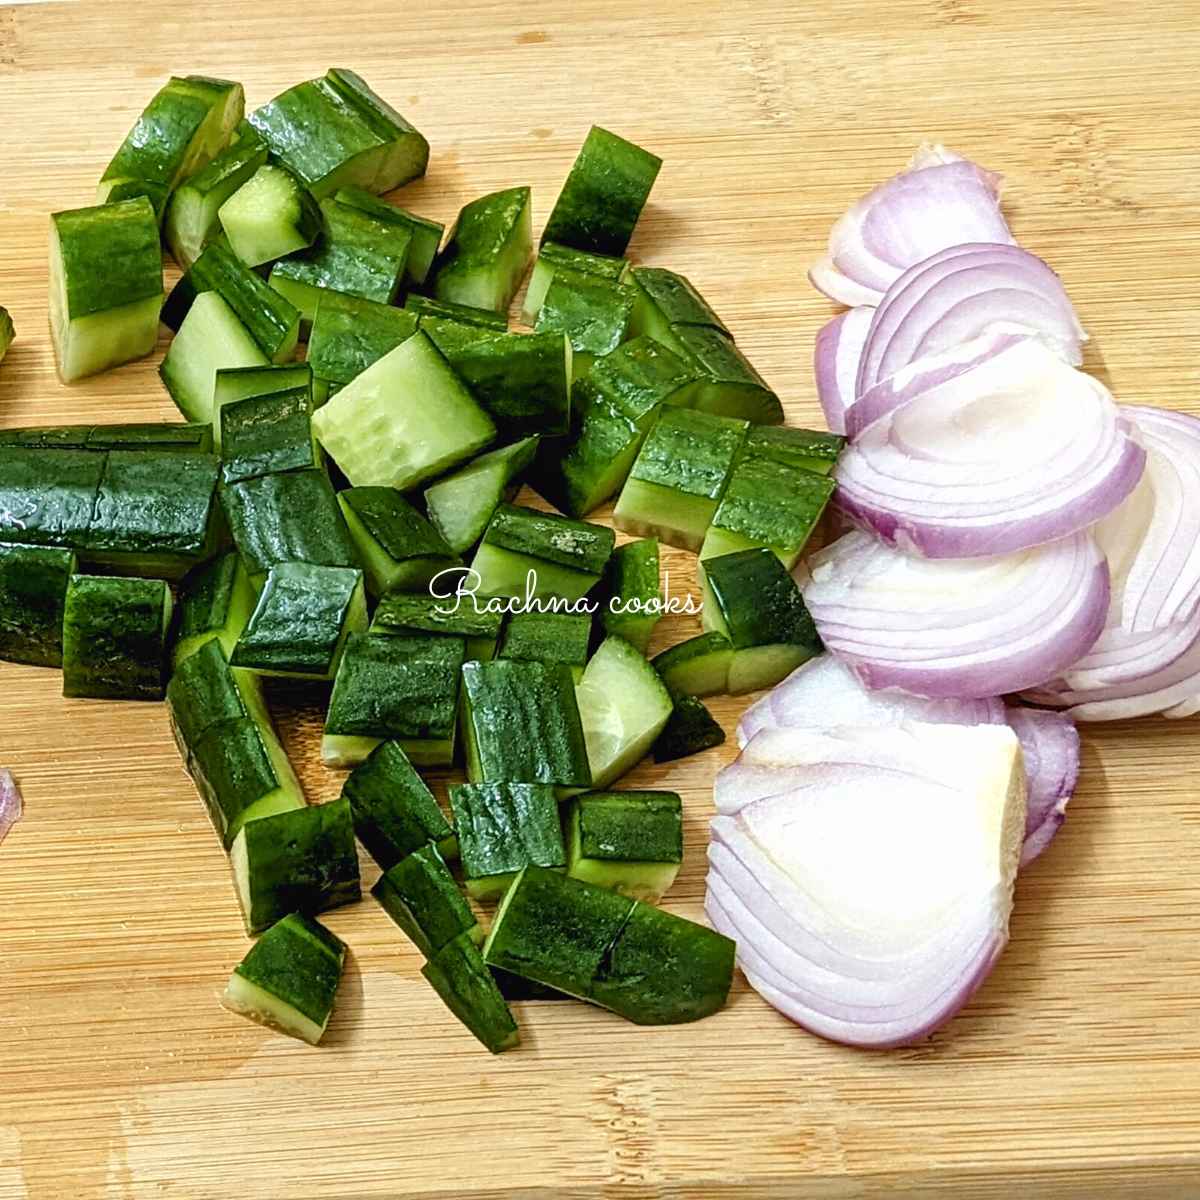 Diced cucumber and sliced onion